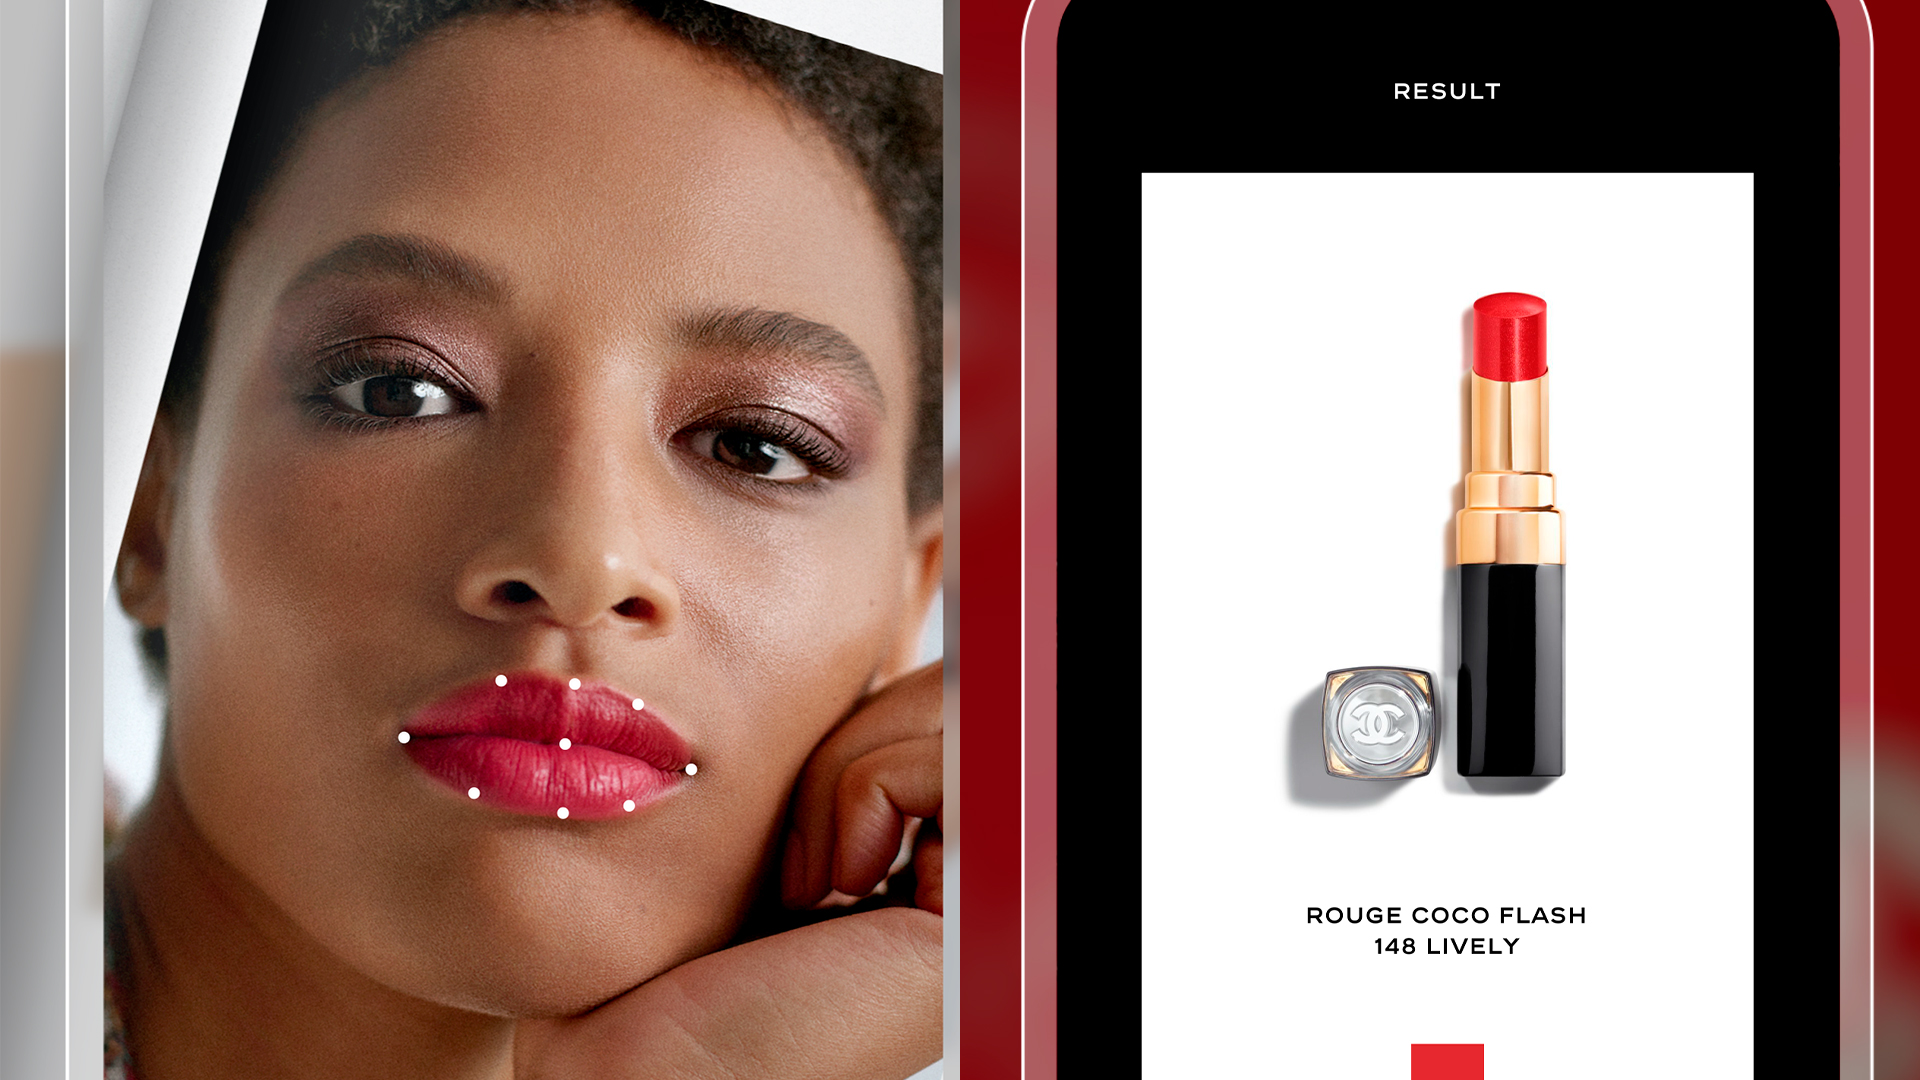 Transform your favorite color into lipstick with the Chanel Lipscanner app